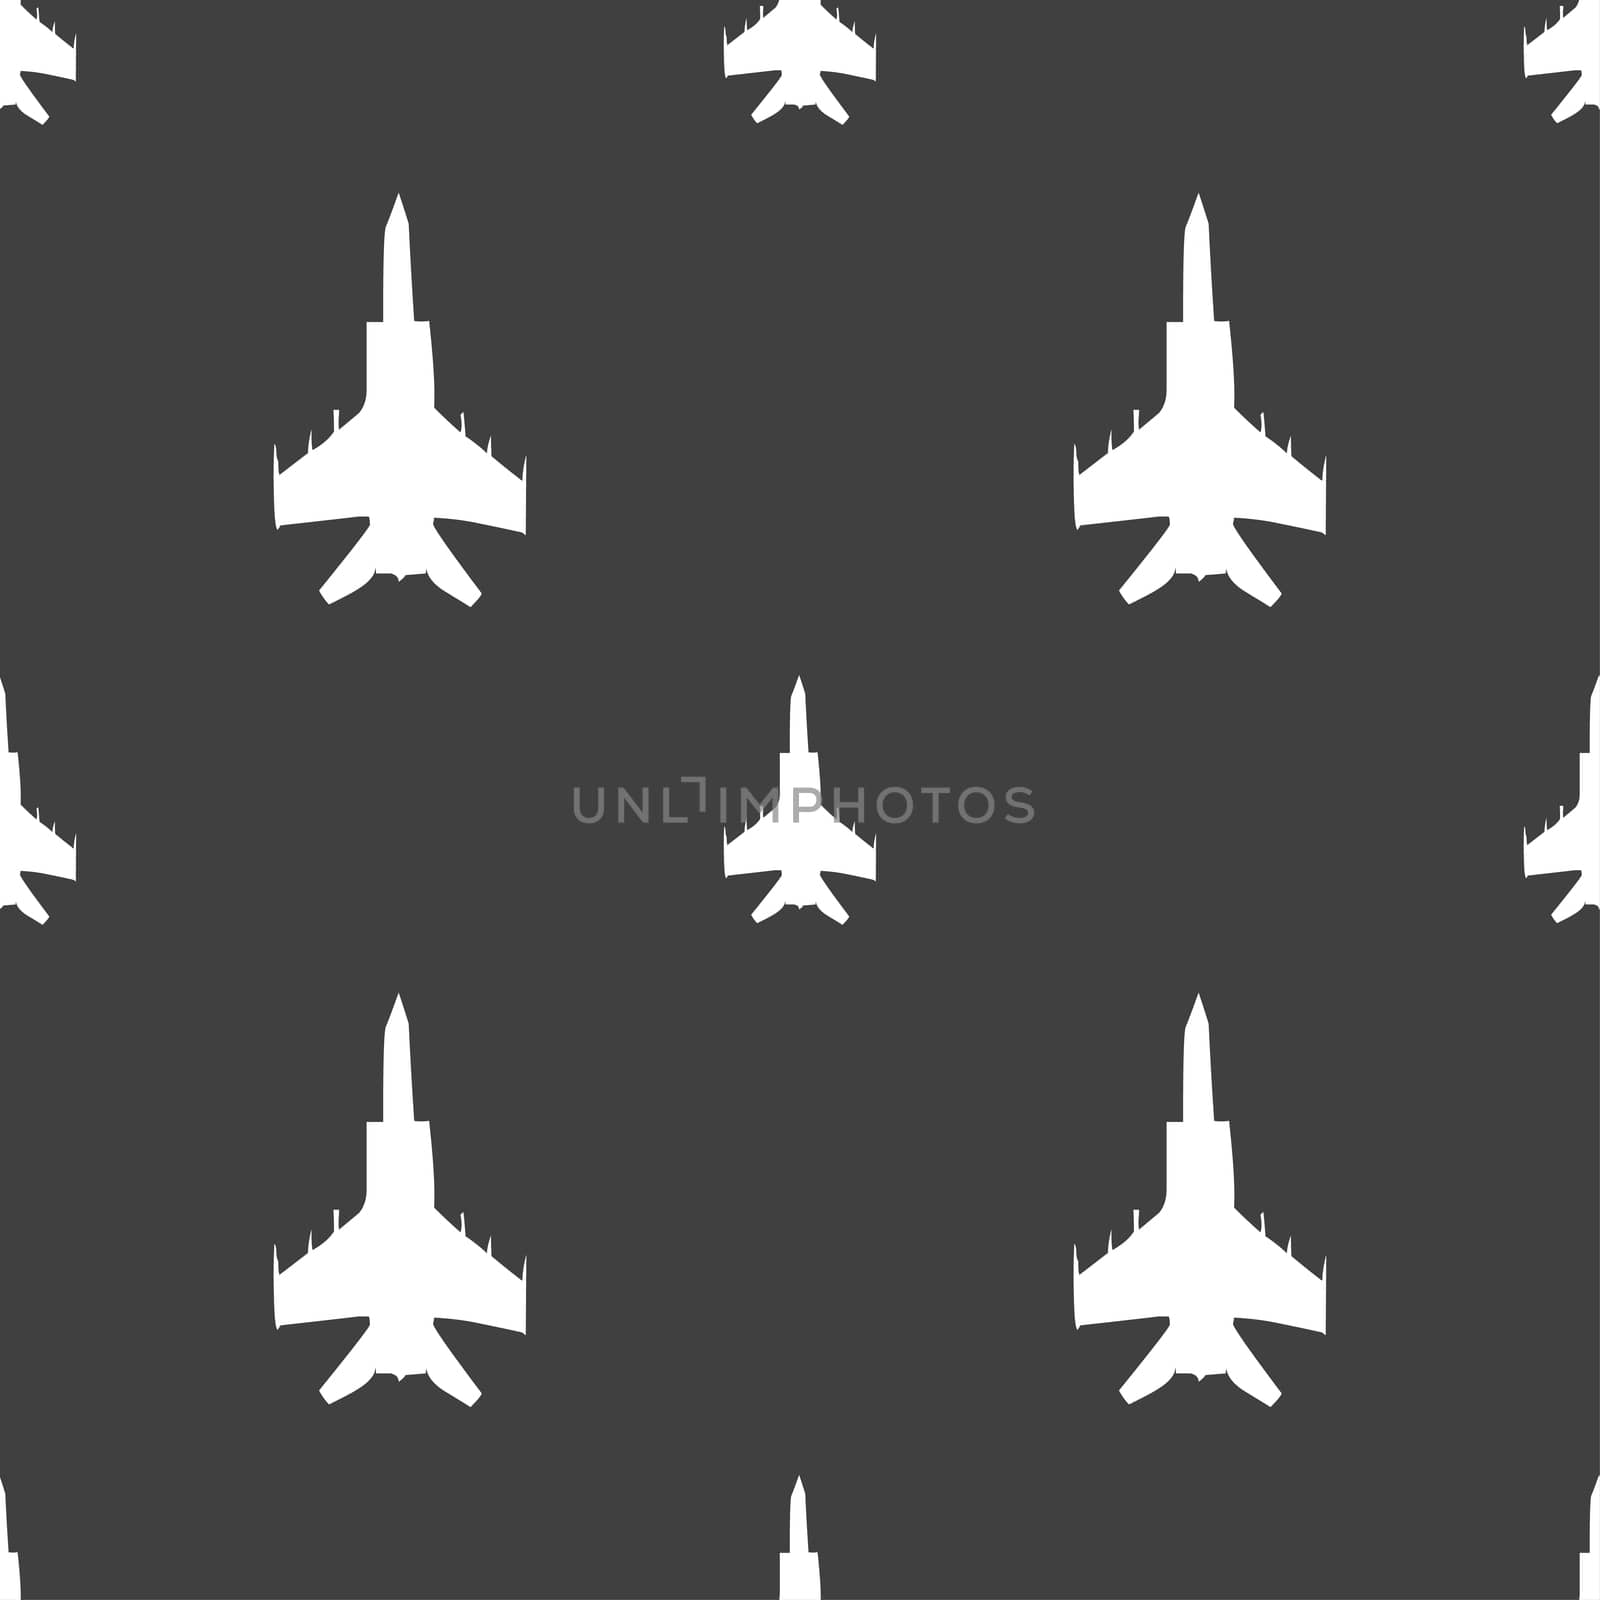 fighter icon sign. Seamless pattern on a gray background. illustration